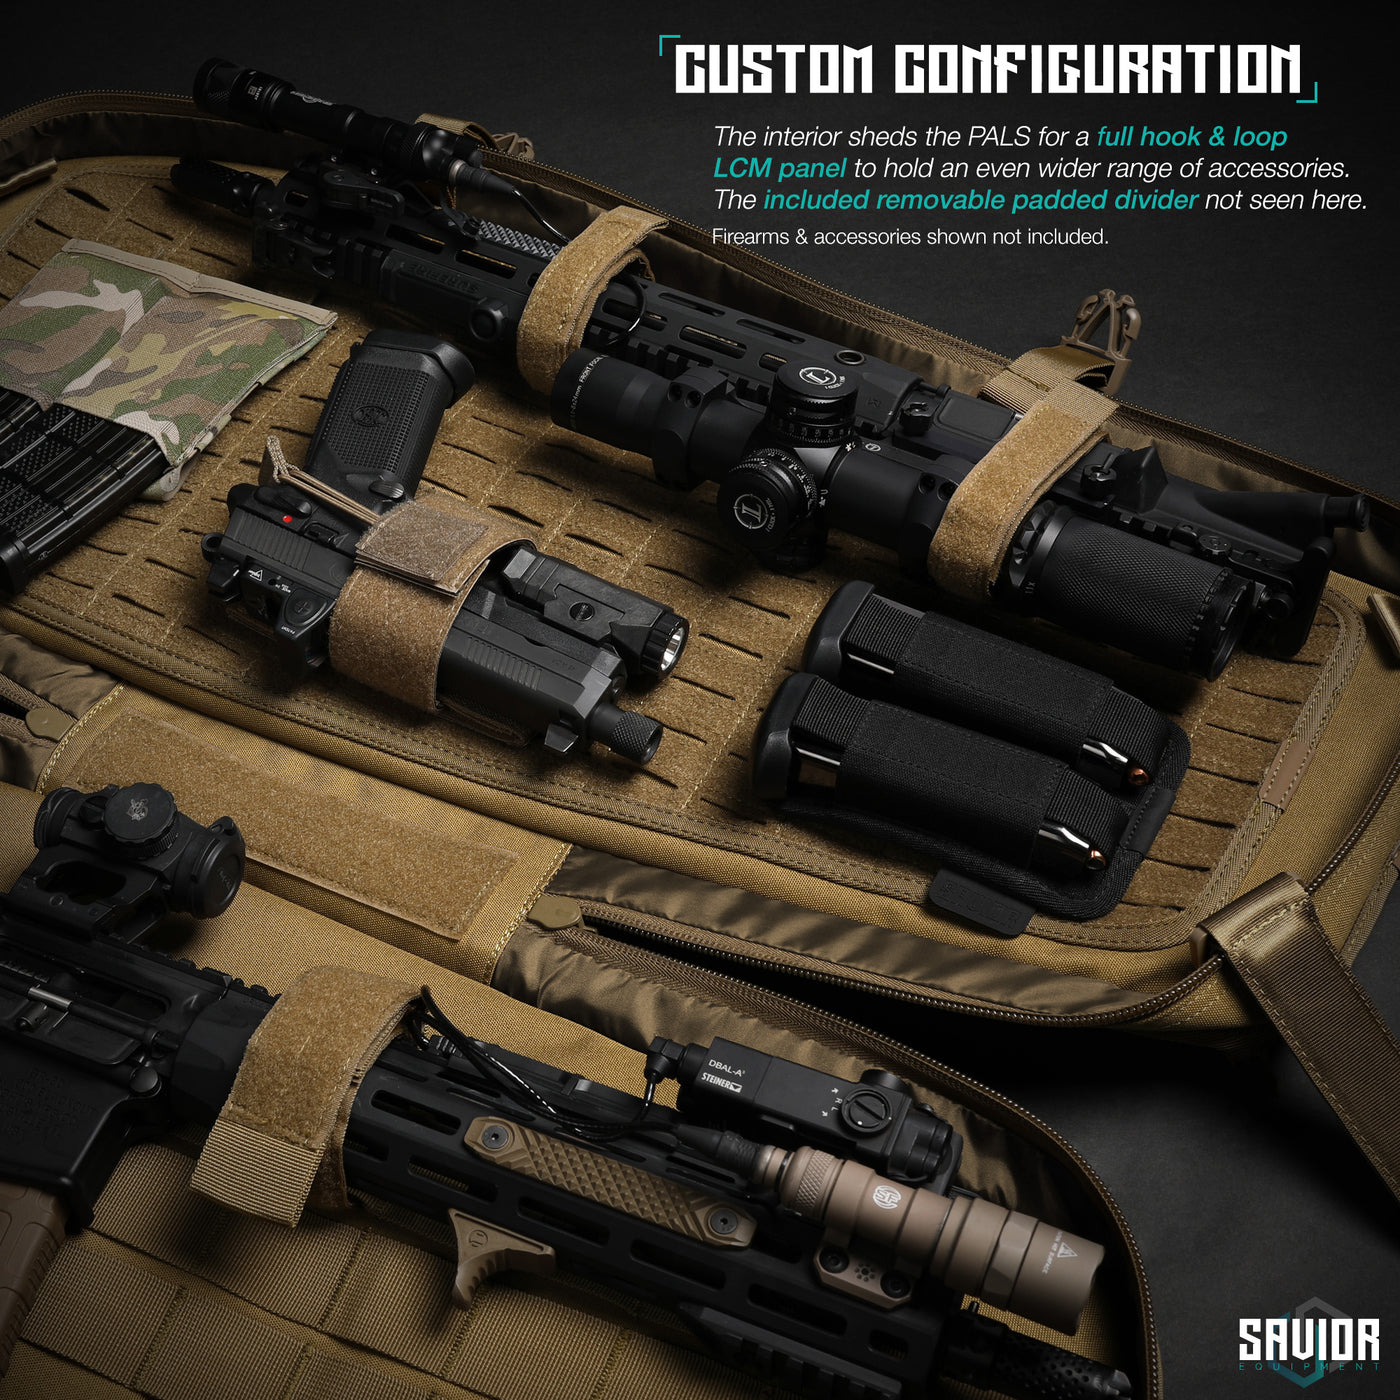 Custom Configuration - The interior sheds the PALS for a full hook & loop LCM panel to hold an even wider range of accessories. The included removable padded divider not seen here. Firearms & accessories shown not included.